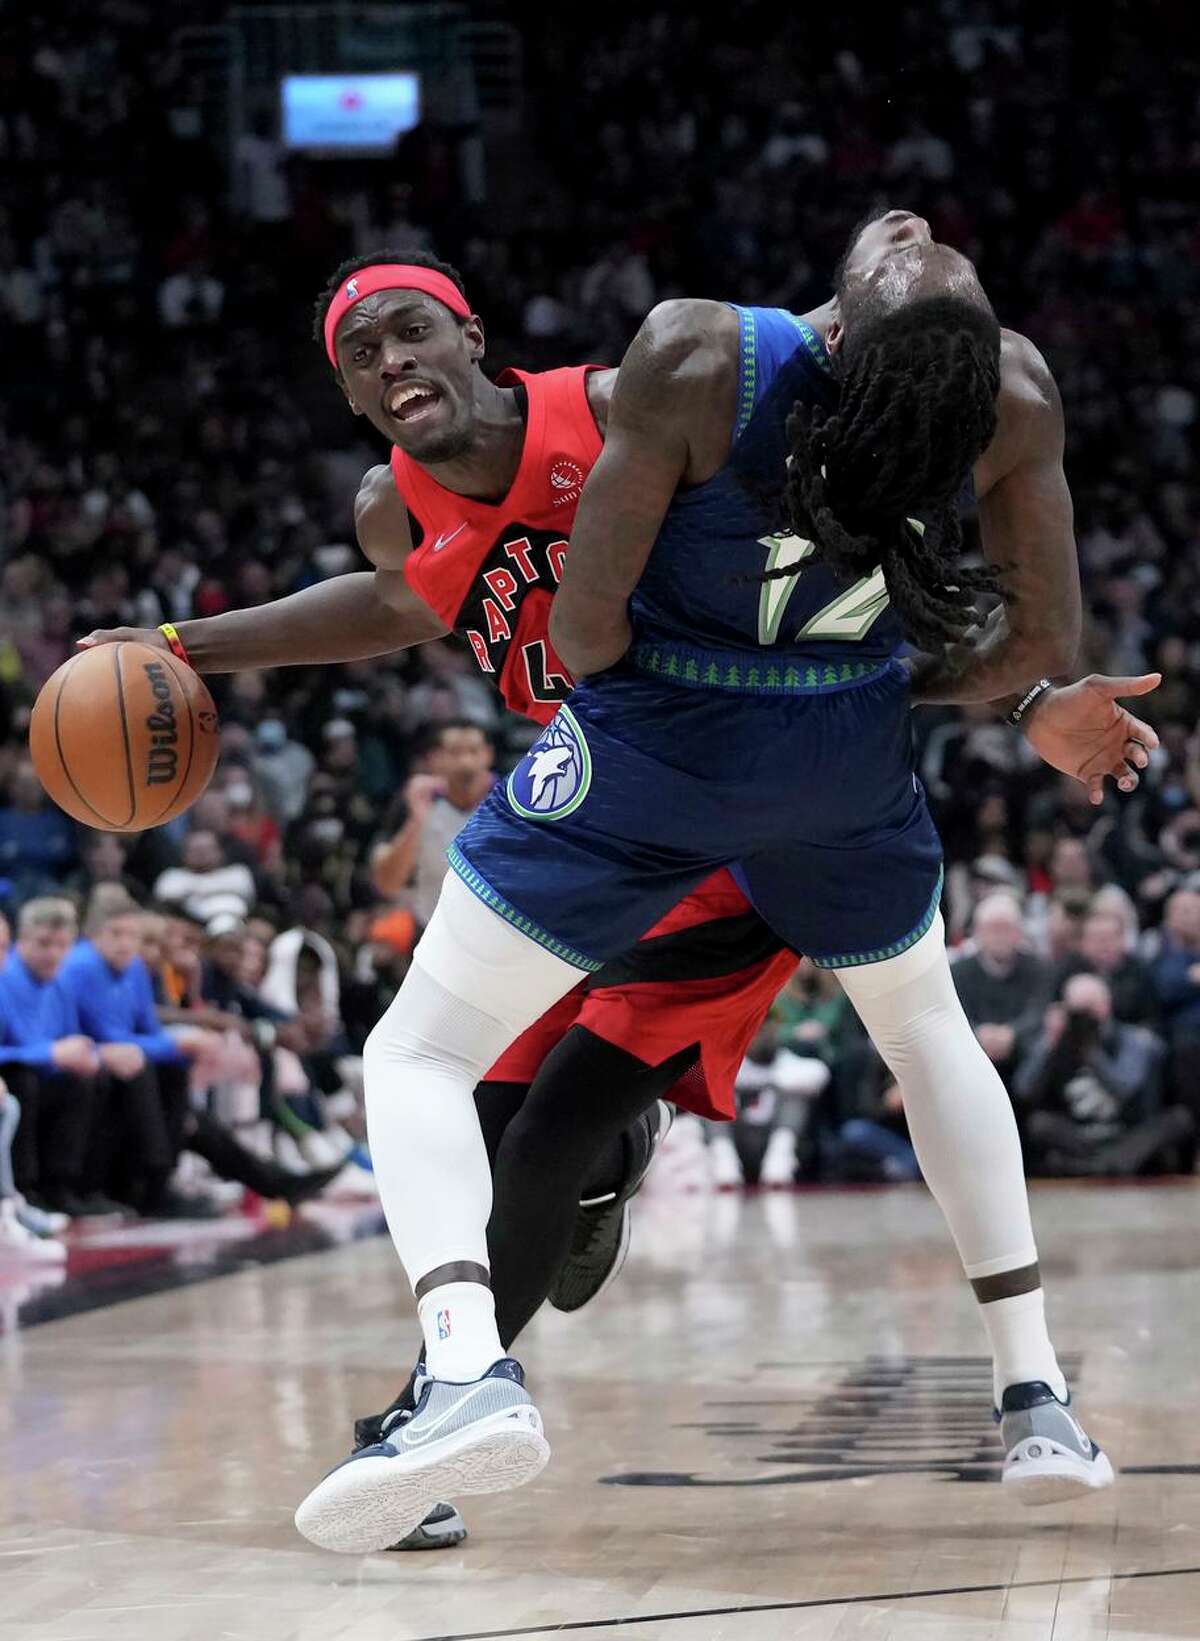 Toronto forward Pascal Siakam collides with Minnesota forward Taurean Prince. Siakam had 13 assists in the win.